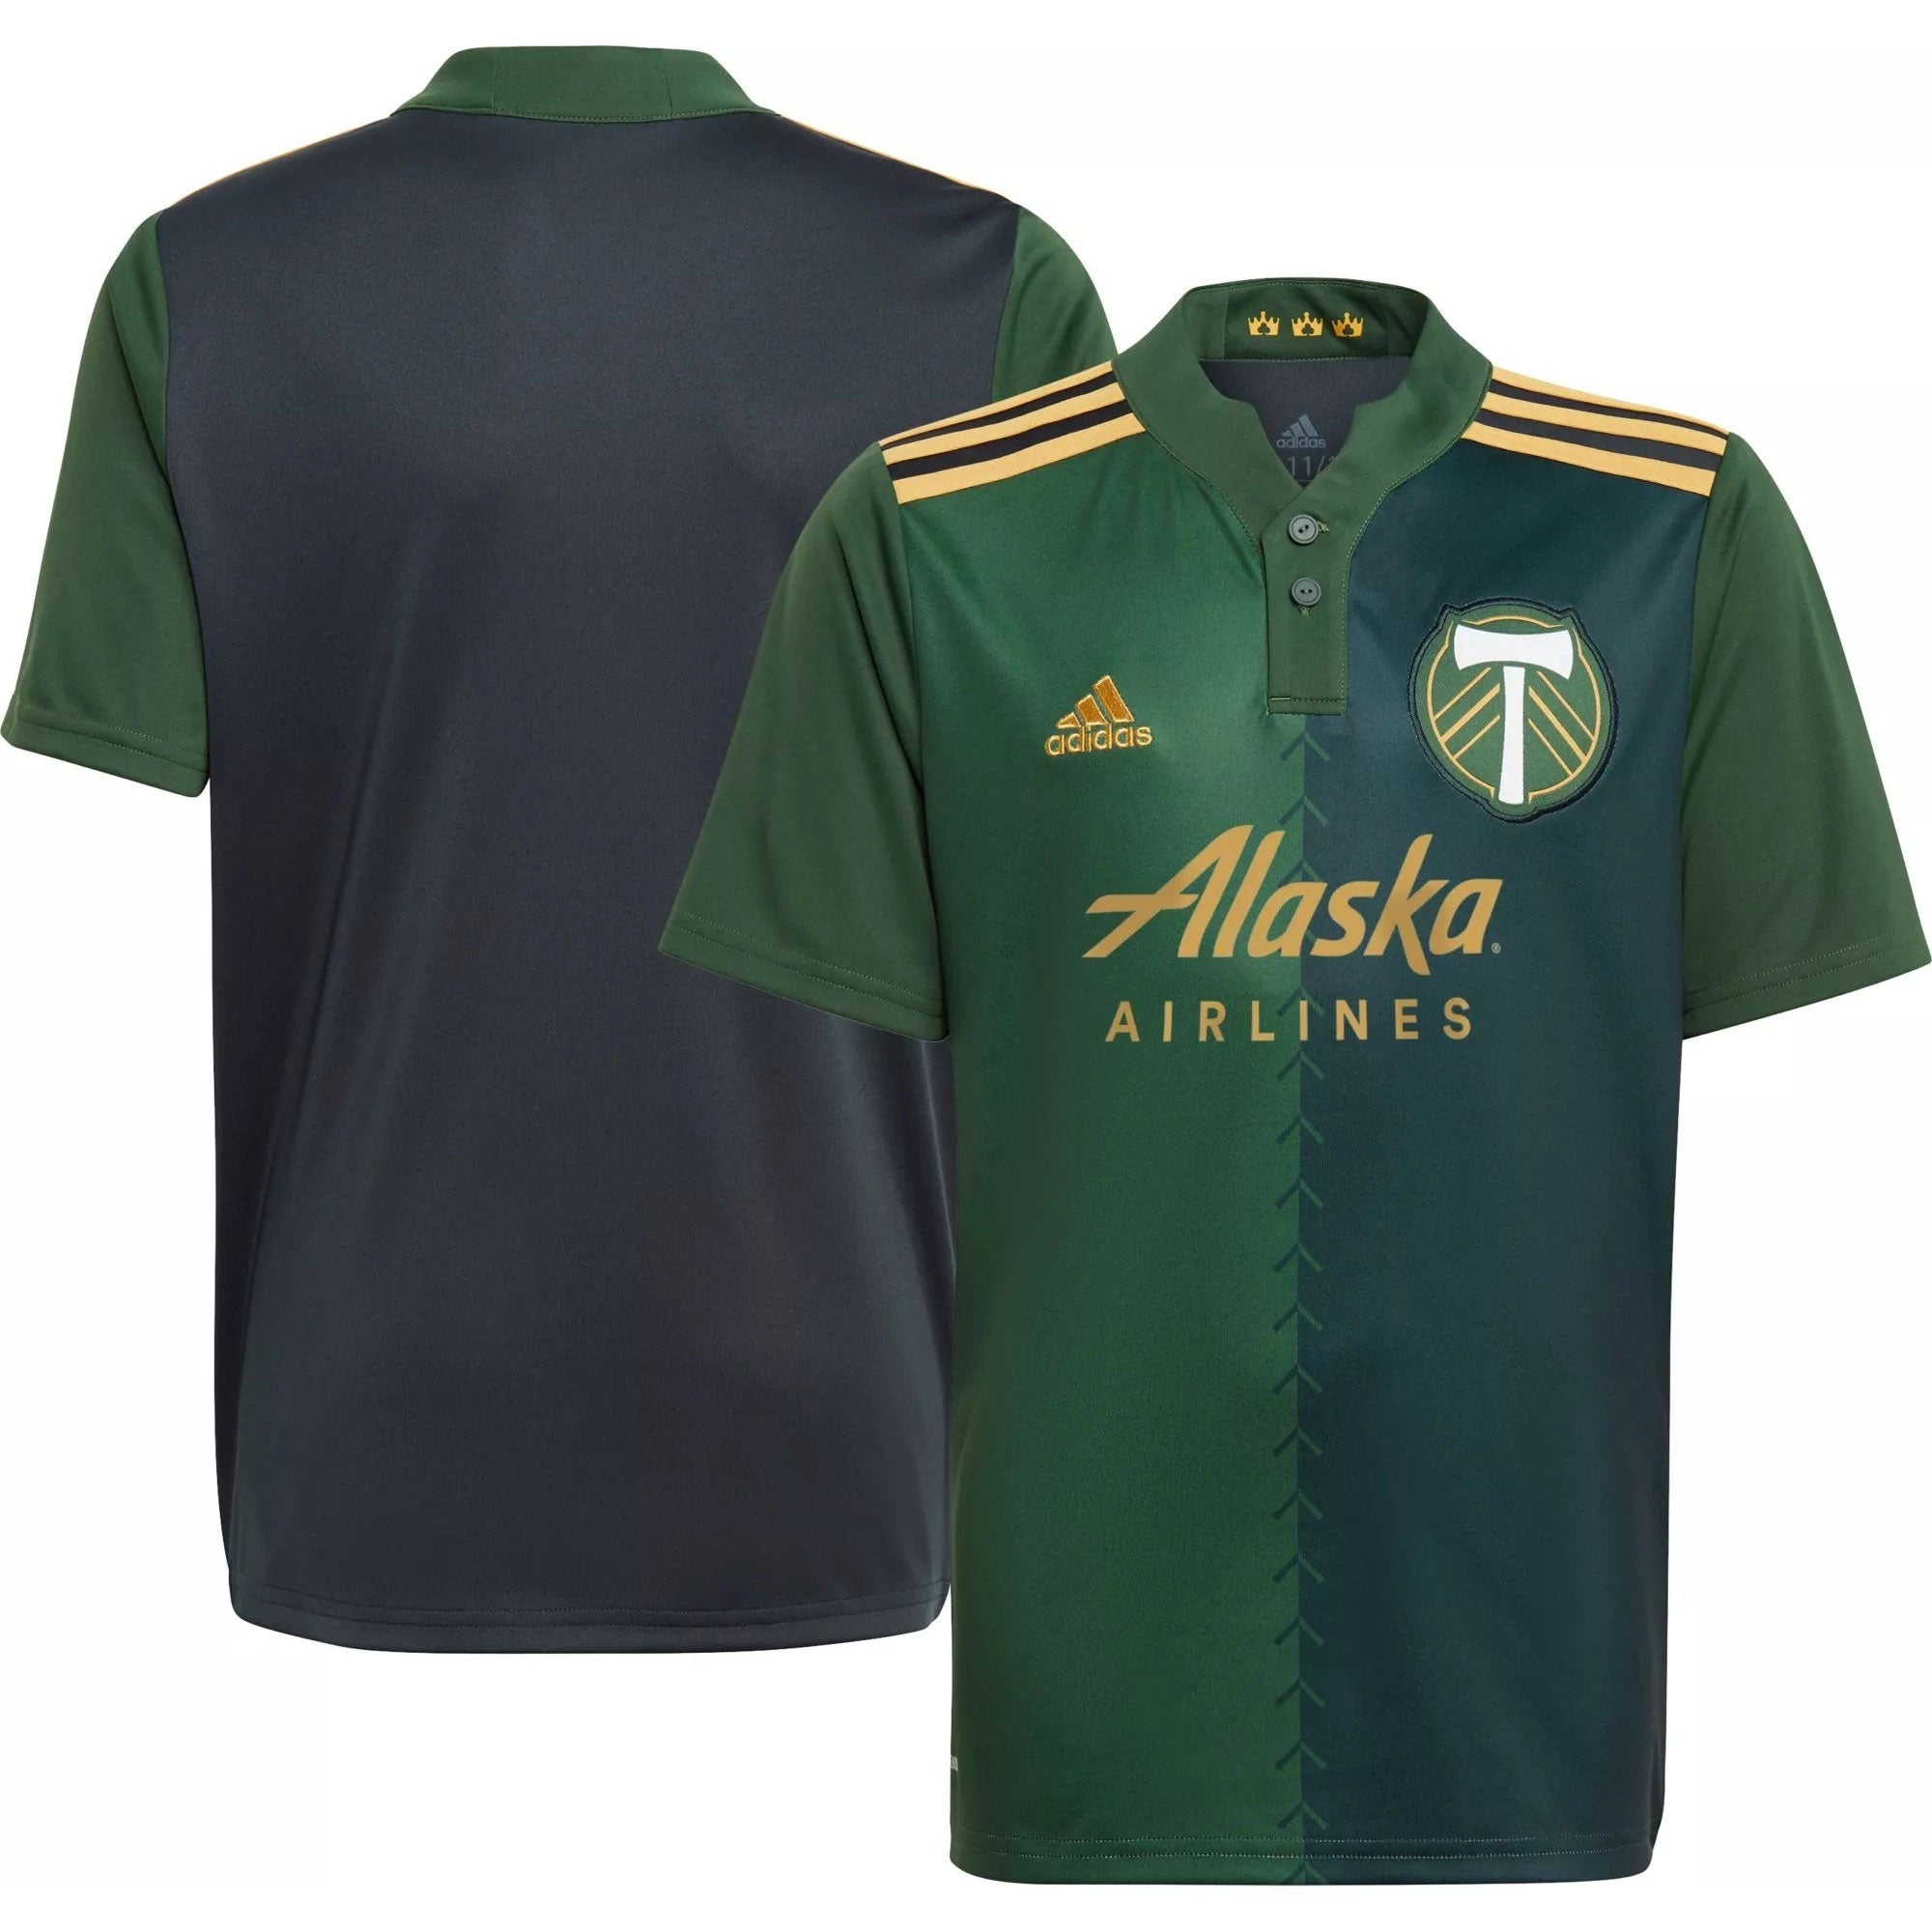 Ranking Portland Timbers jerseys in the MLS era: Which one is your